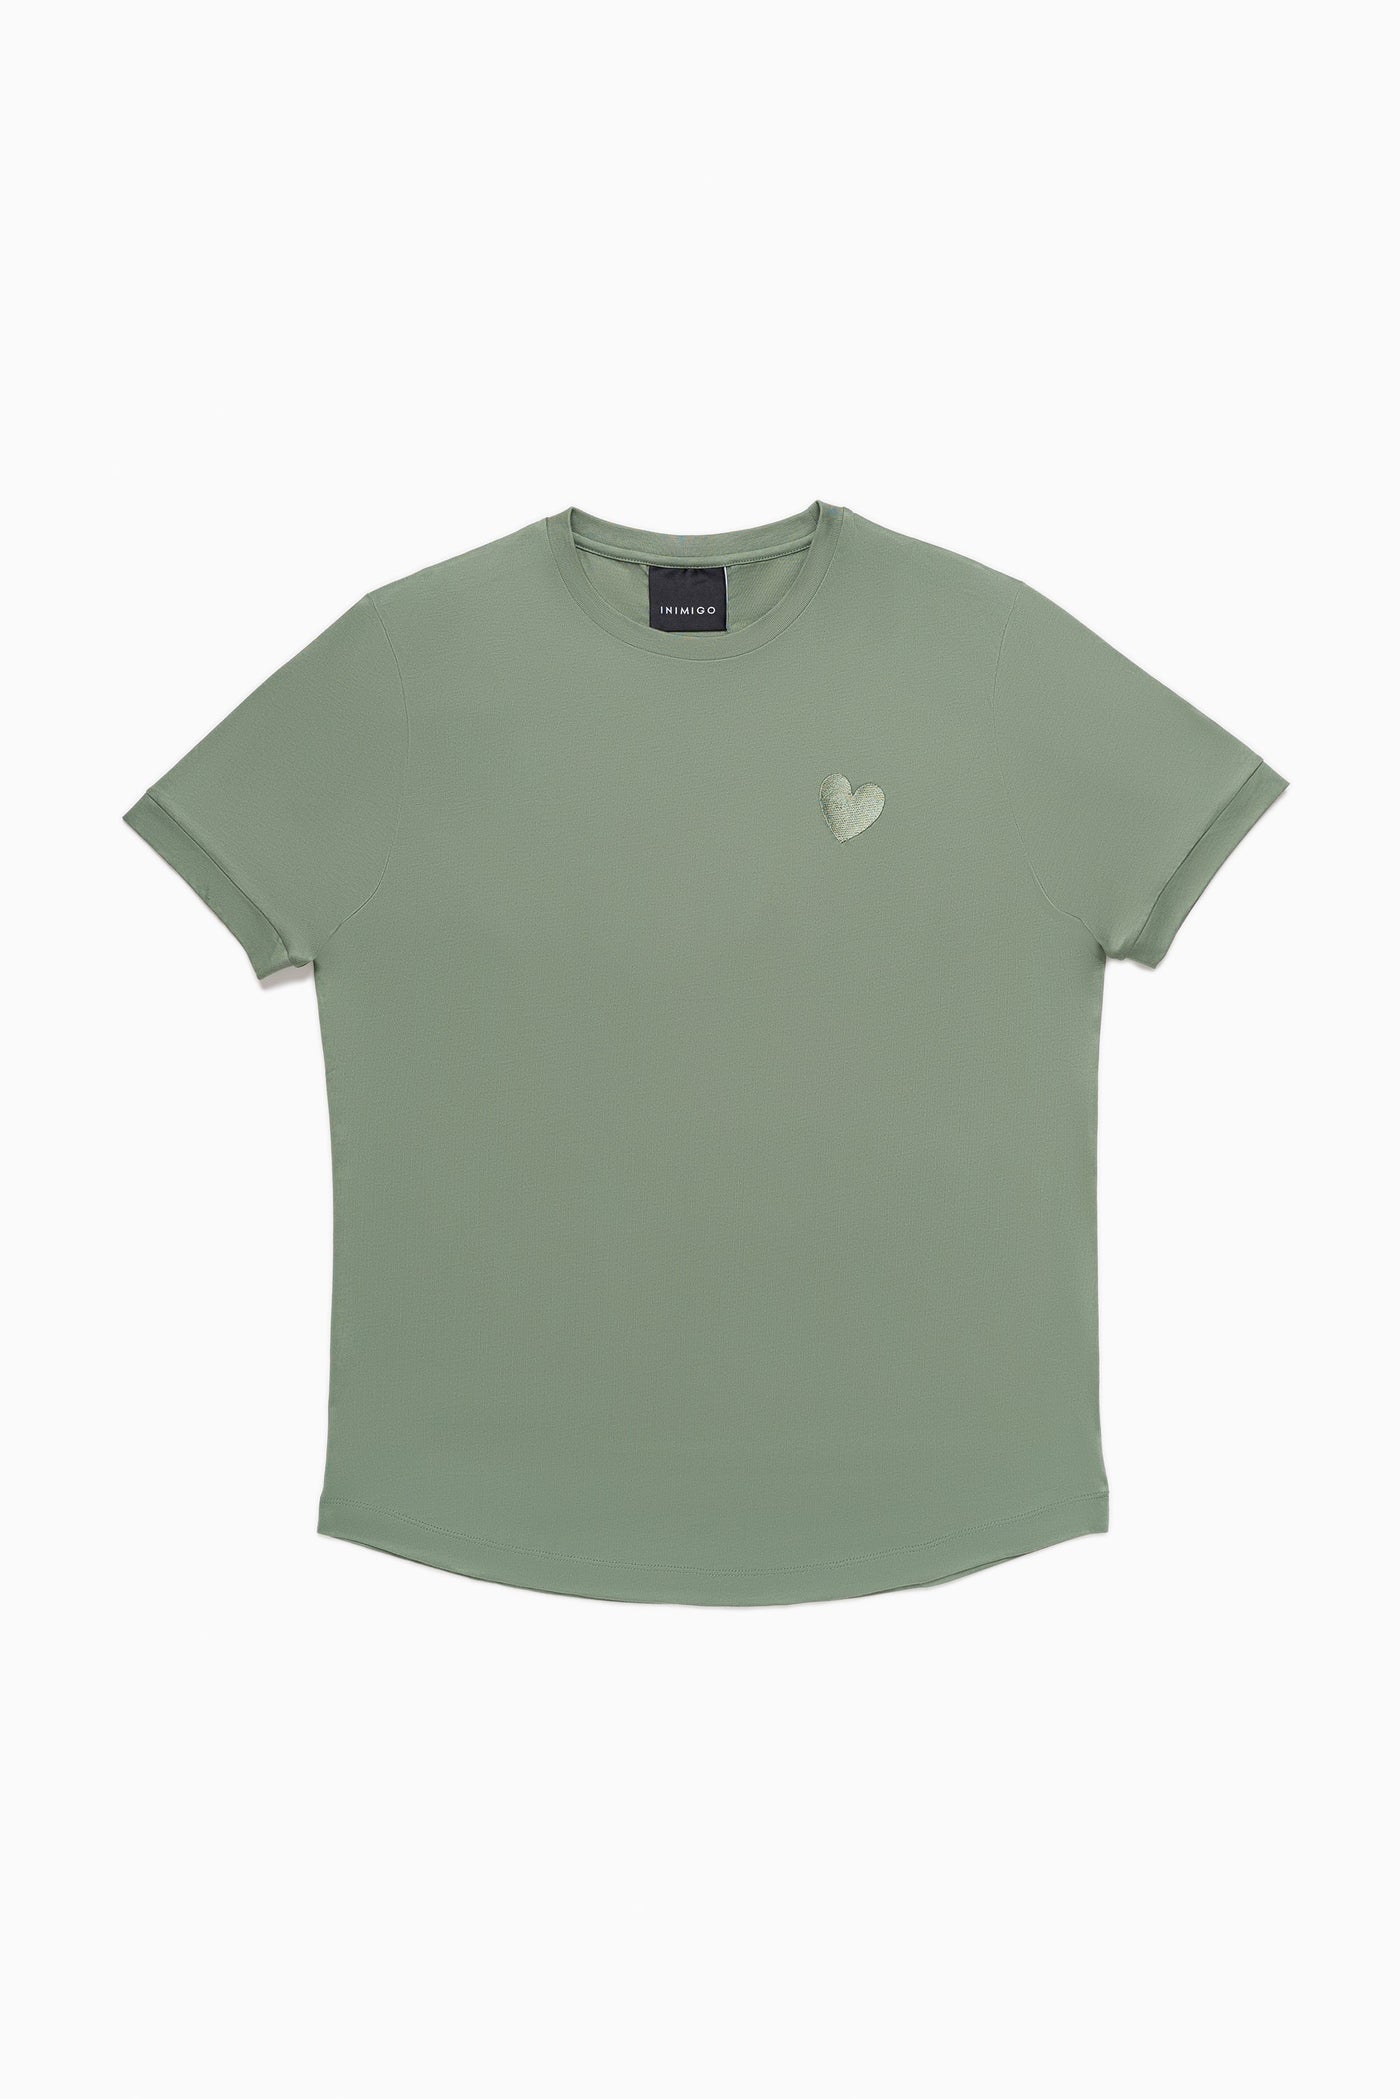 Classic Embroidery Heart Green T-shirt